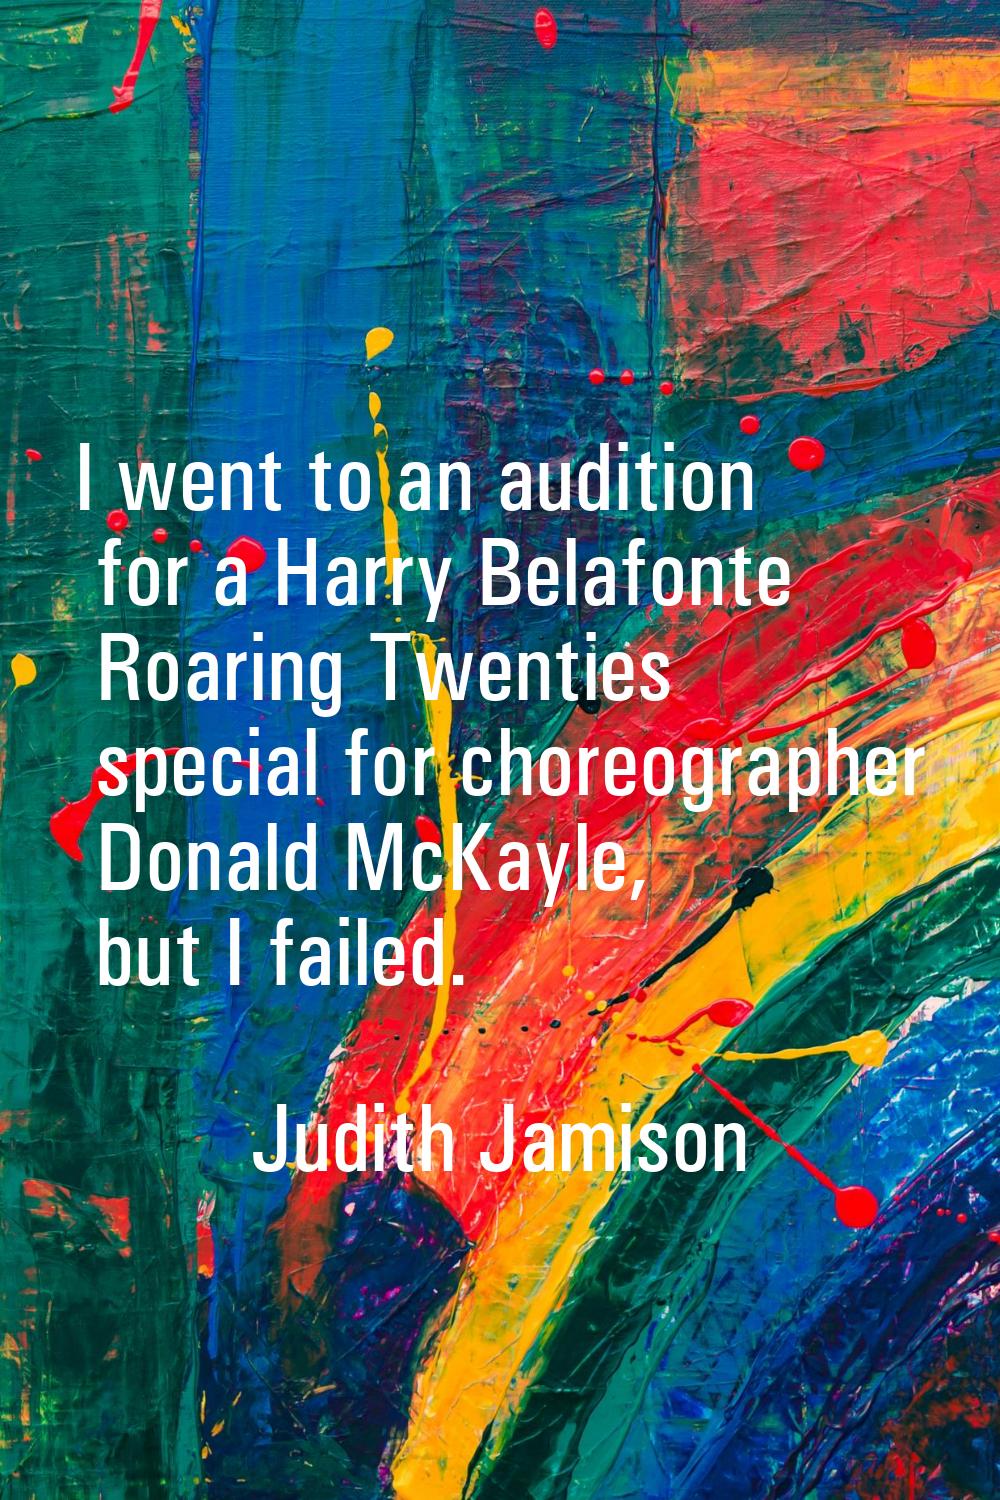 I went to an audition for a Harry Belafonte Roaring Twenties special for choreographer Donald McKay